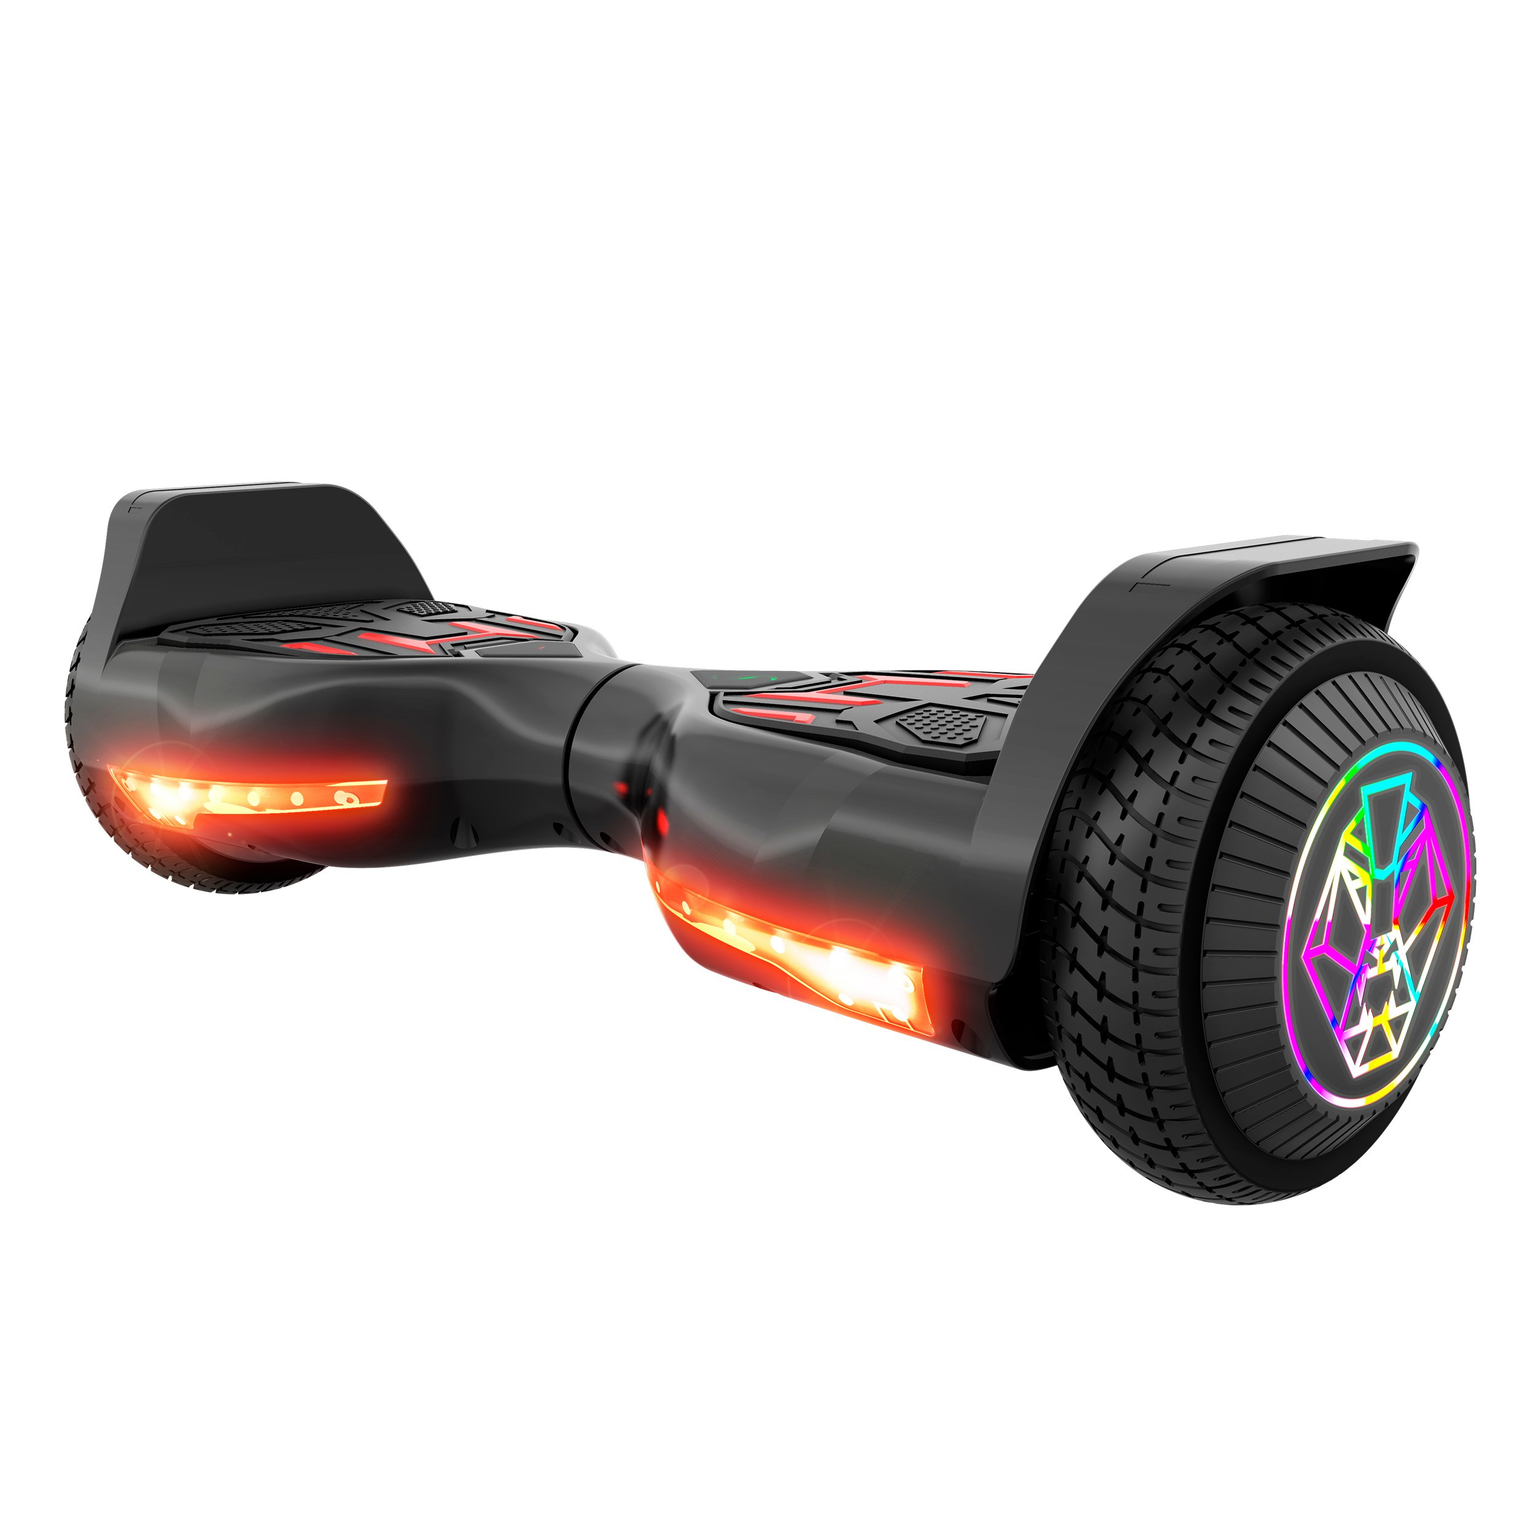 swagBOARD Twist T580 Black Hoverboard with Light-Up LED Wheels